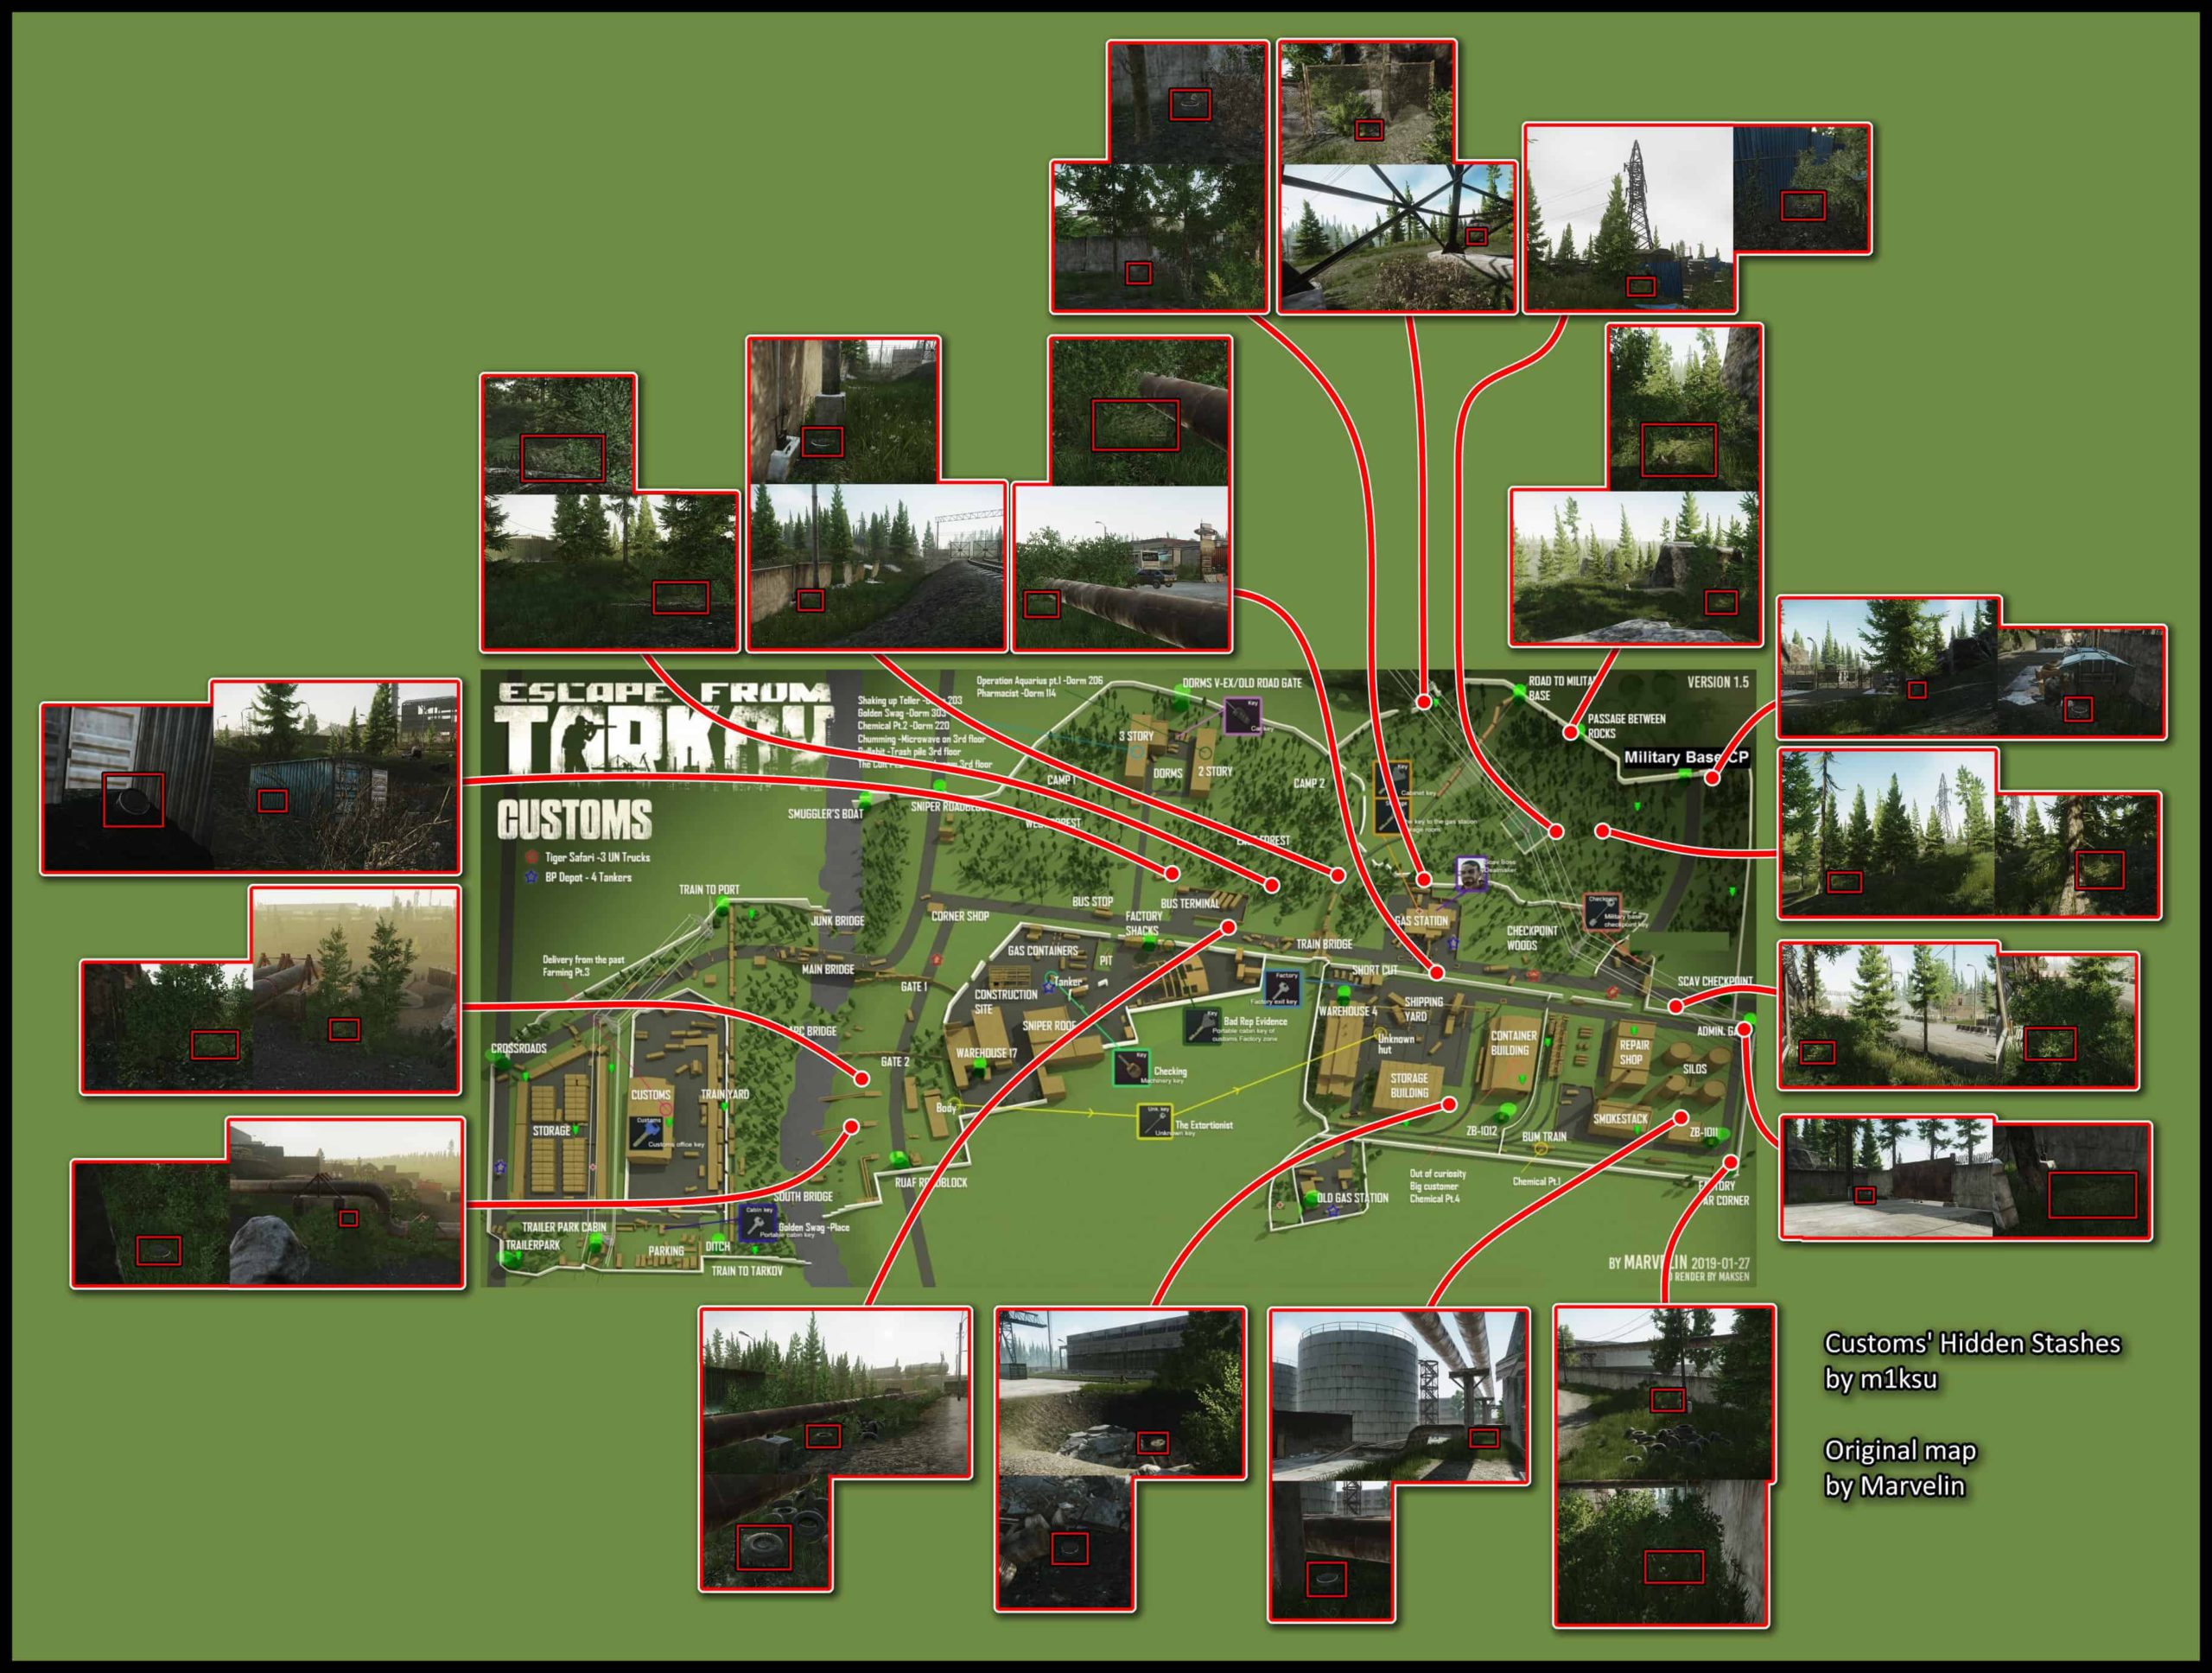 Escape From Tarkov Customs Map - Best Customs Loot and Key Guide